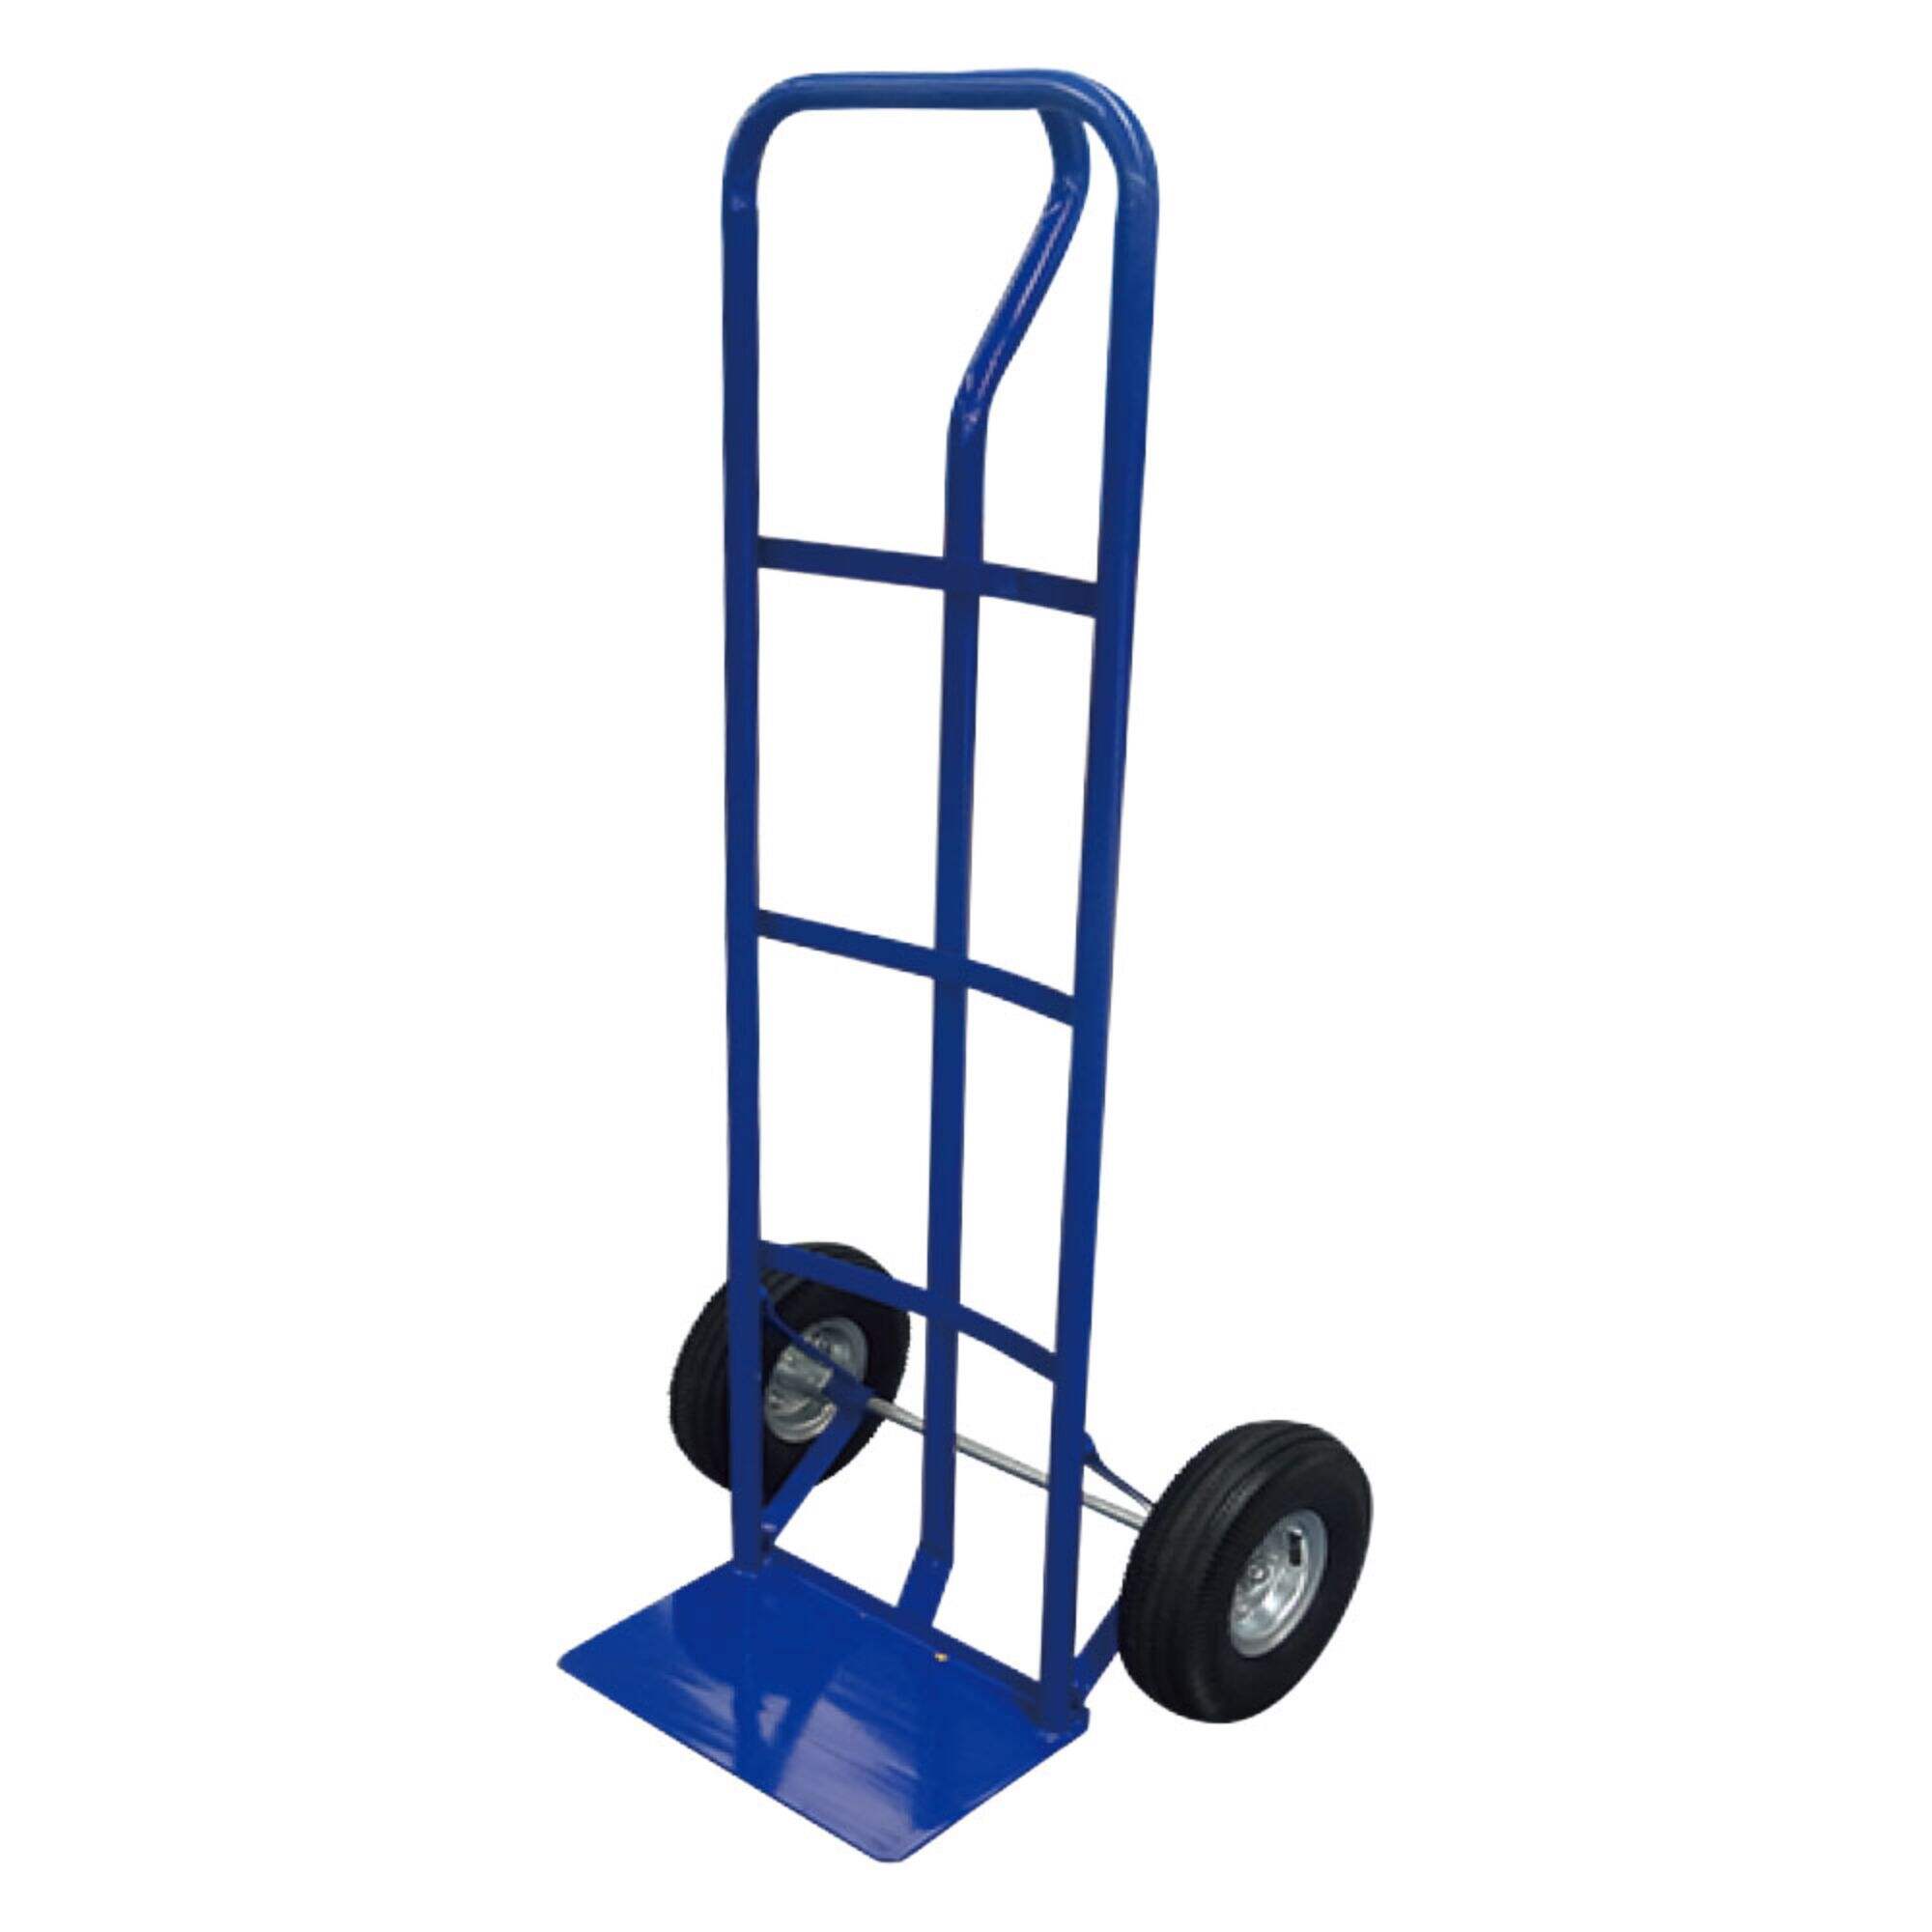 HT1805 Steel Hand Truck, Hand Dolly Cart Trolley, with 10x3.5 inch Pneumatic Wheel